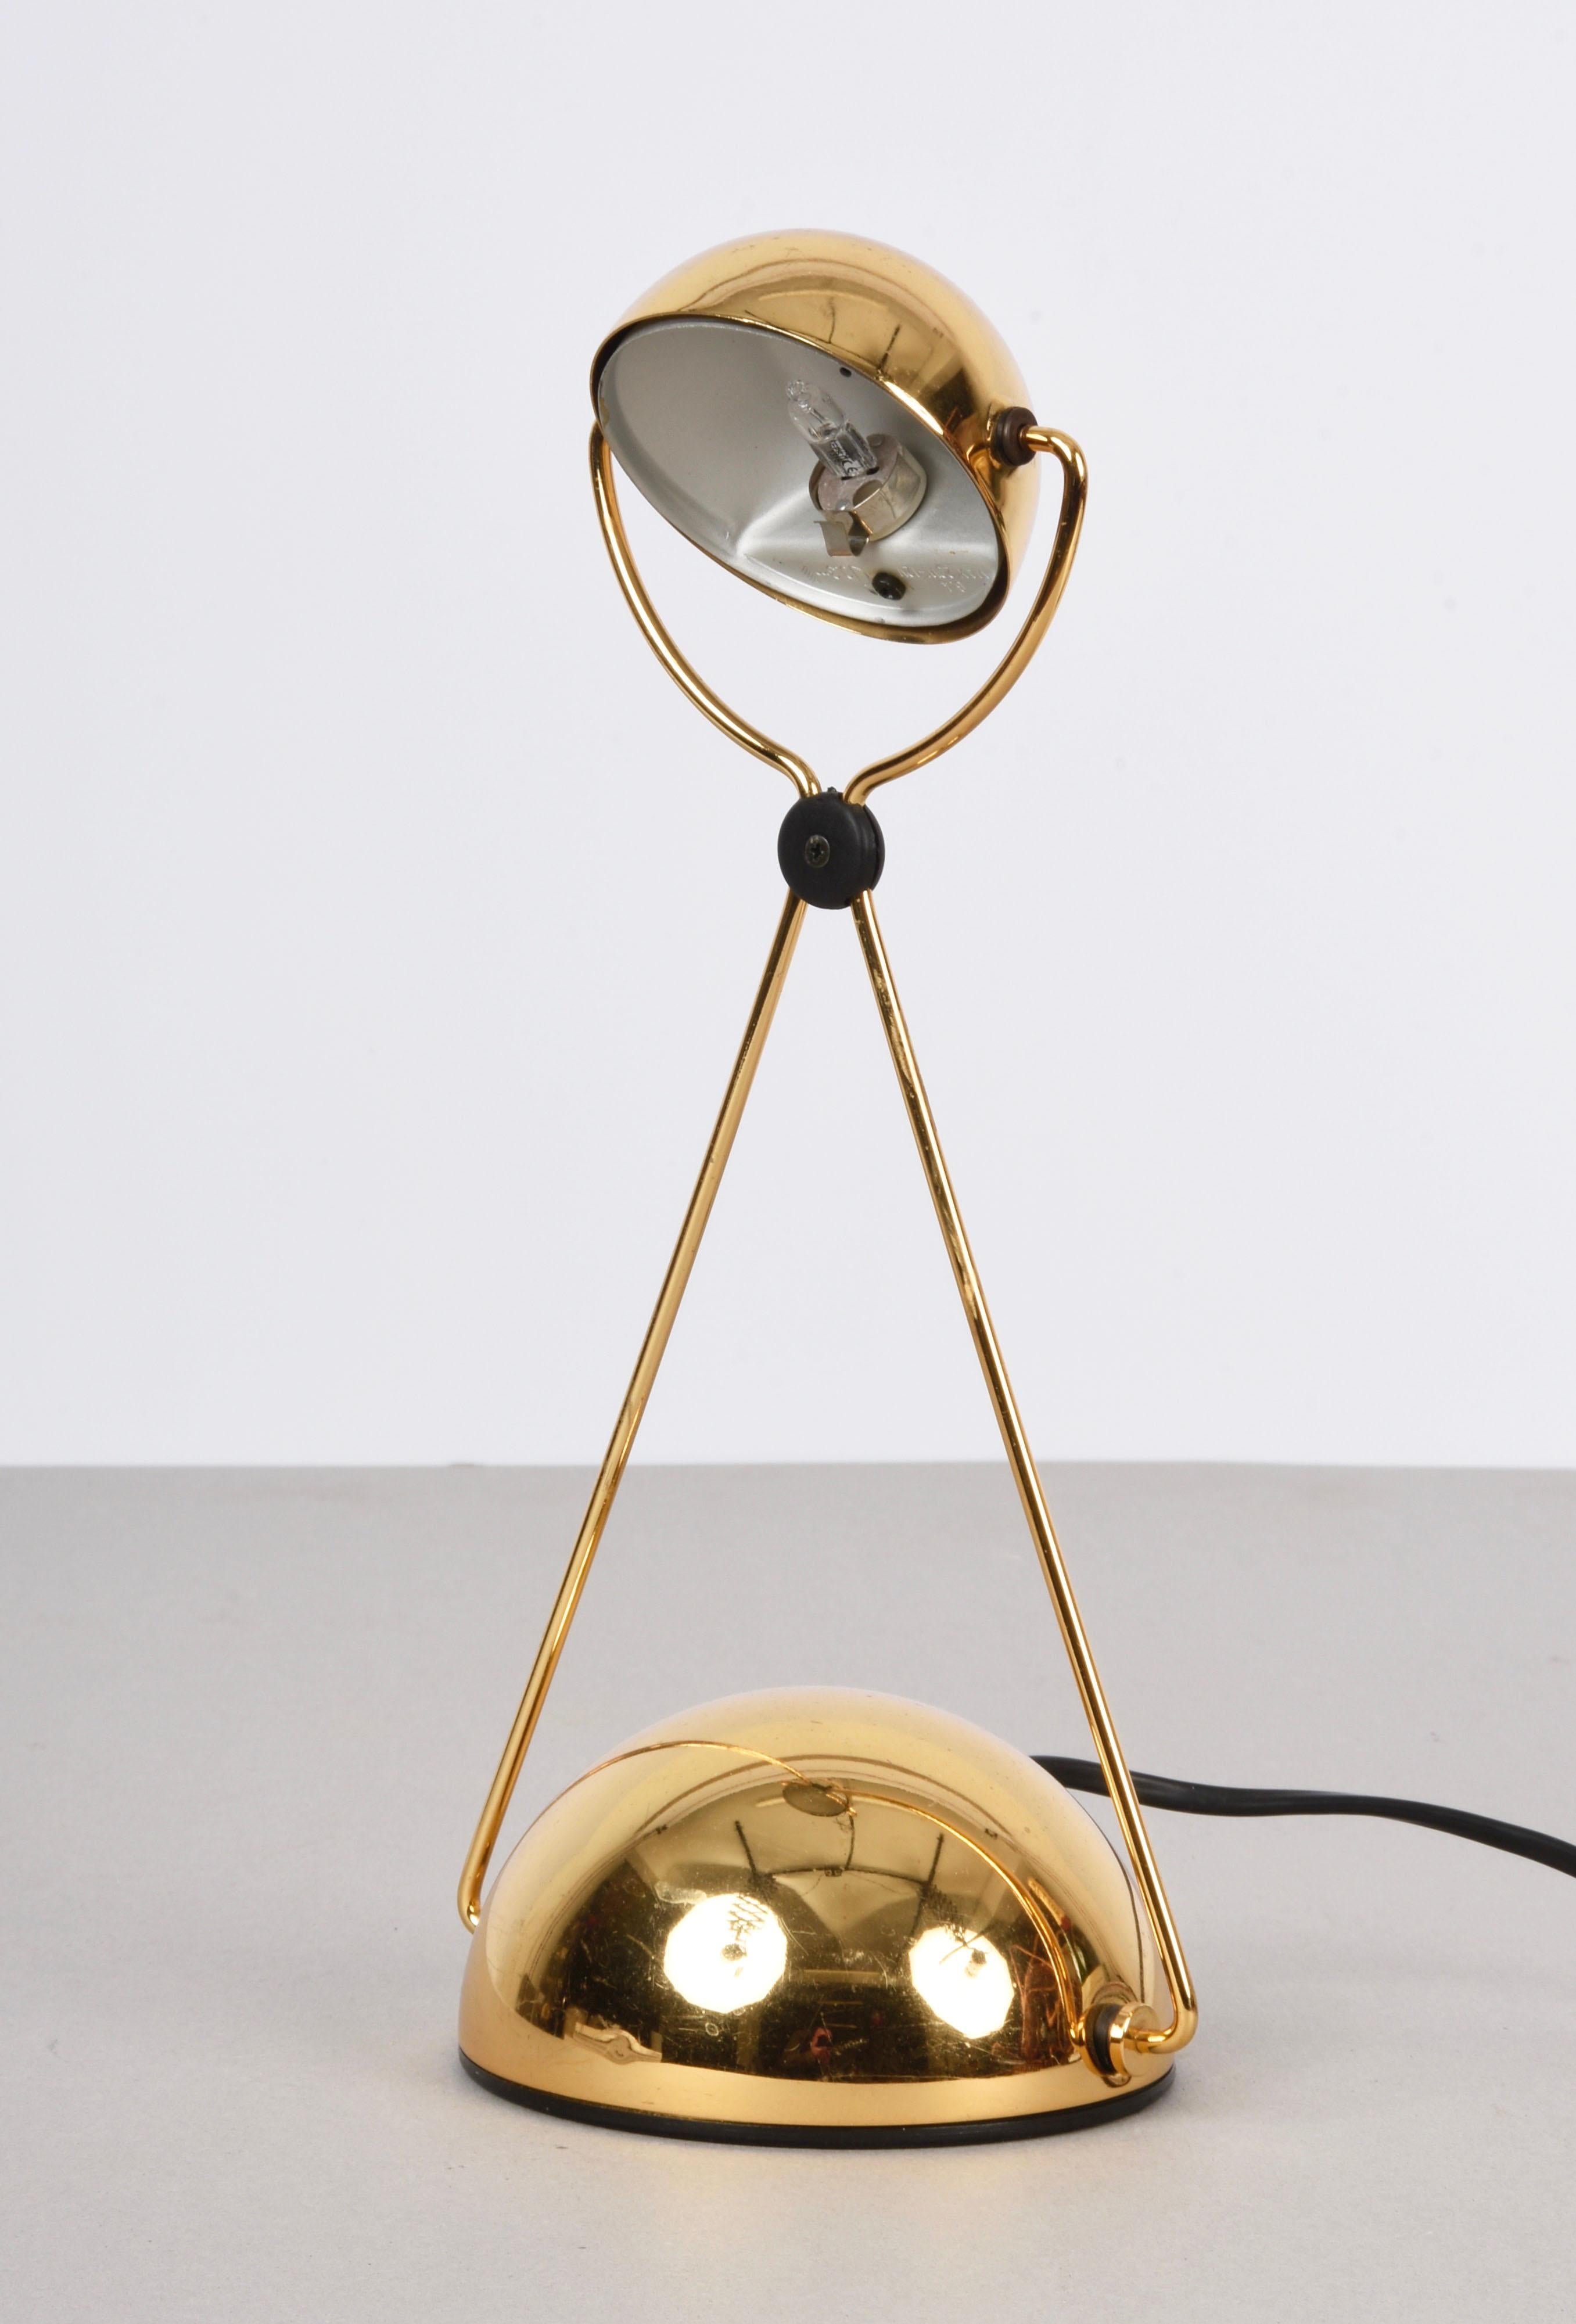 Stefano Cevoli Midcentury Gold-Plated Metal Italian Table Lamp 'Meridiana' 1980s In Good Condition For Sale In Roma, IT